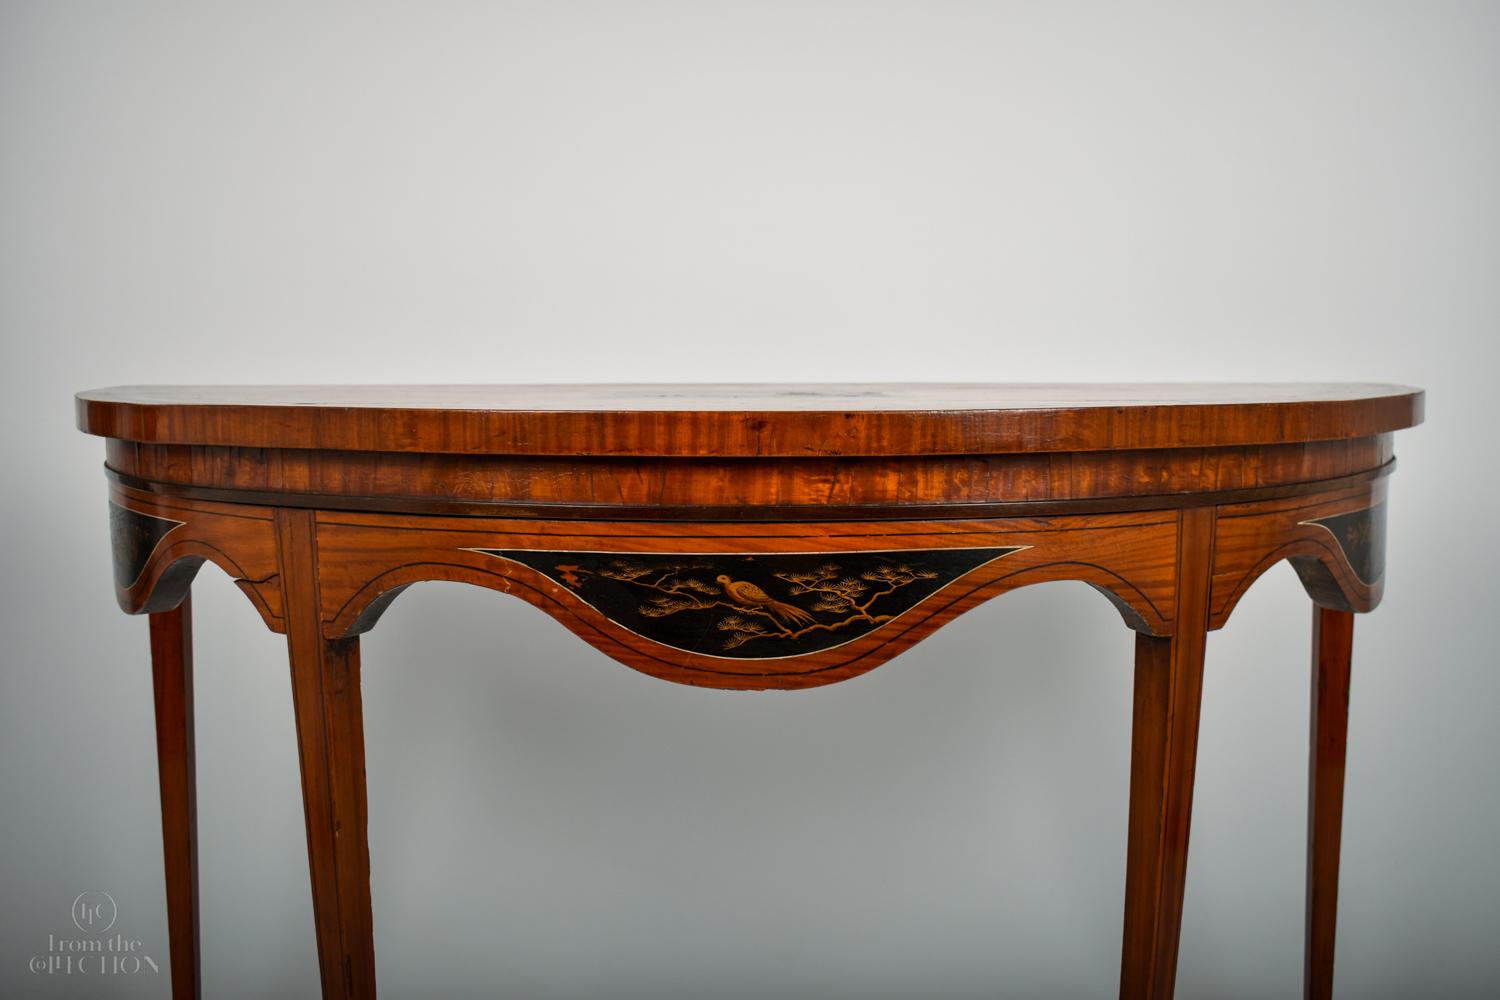 British Chinese Style Demi-Lune Pier Table, circa 1780 For Sale